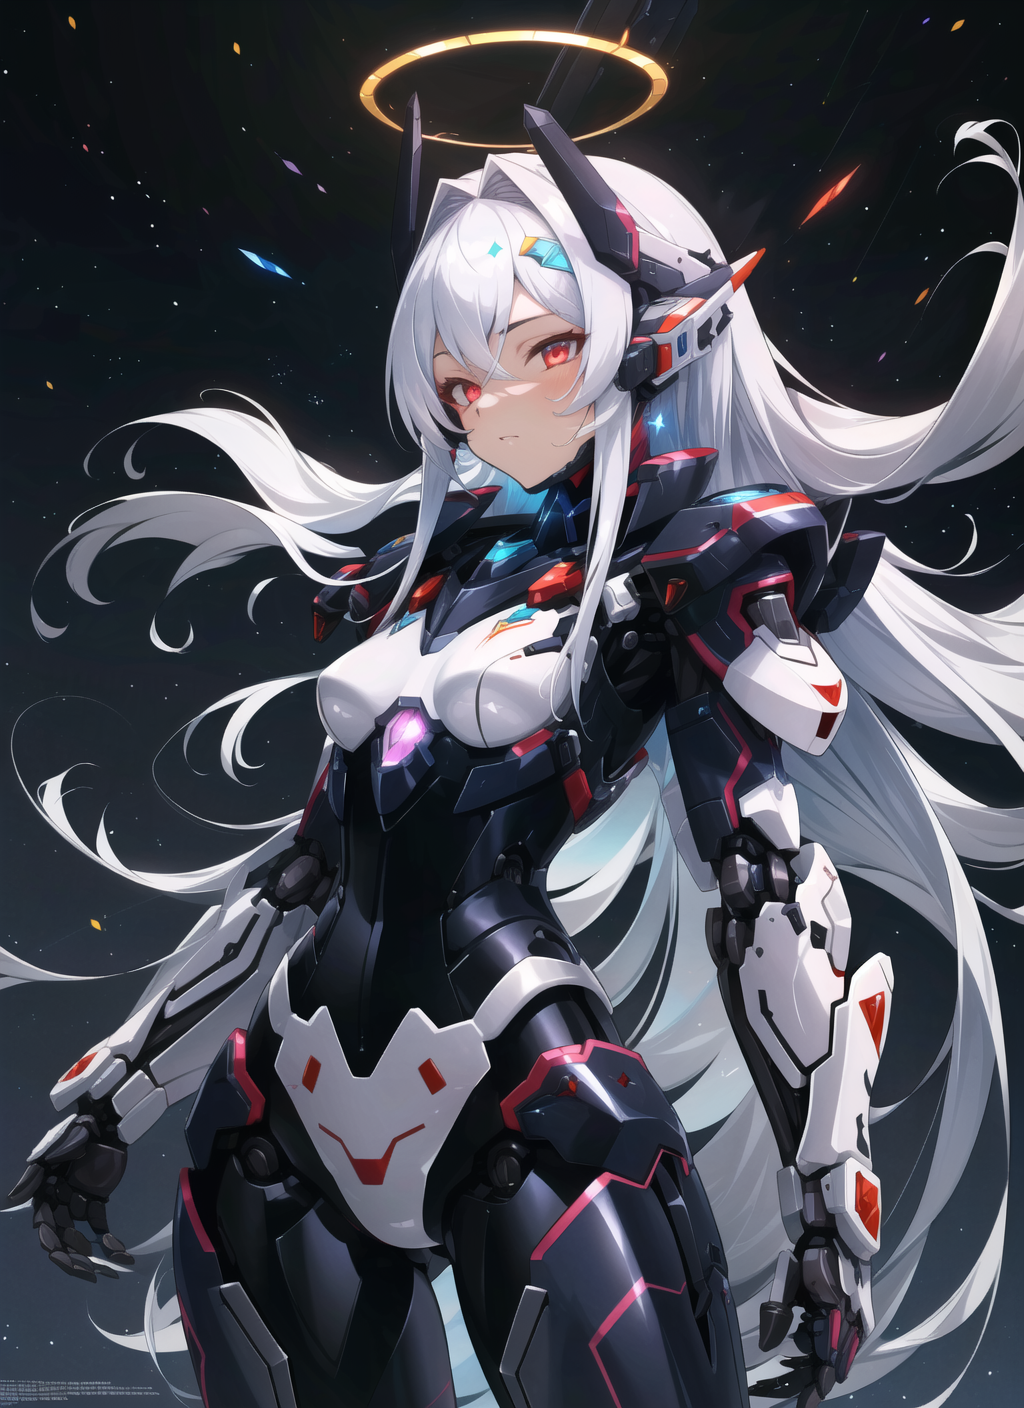 Anime character with white hair and armor.